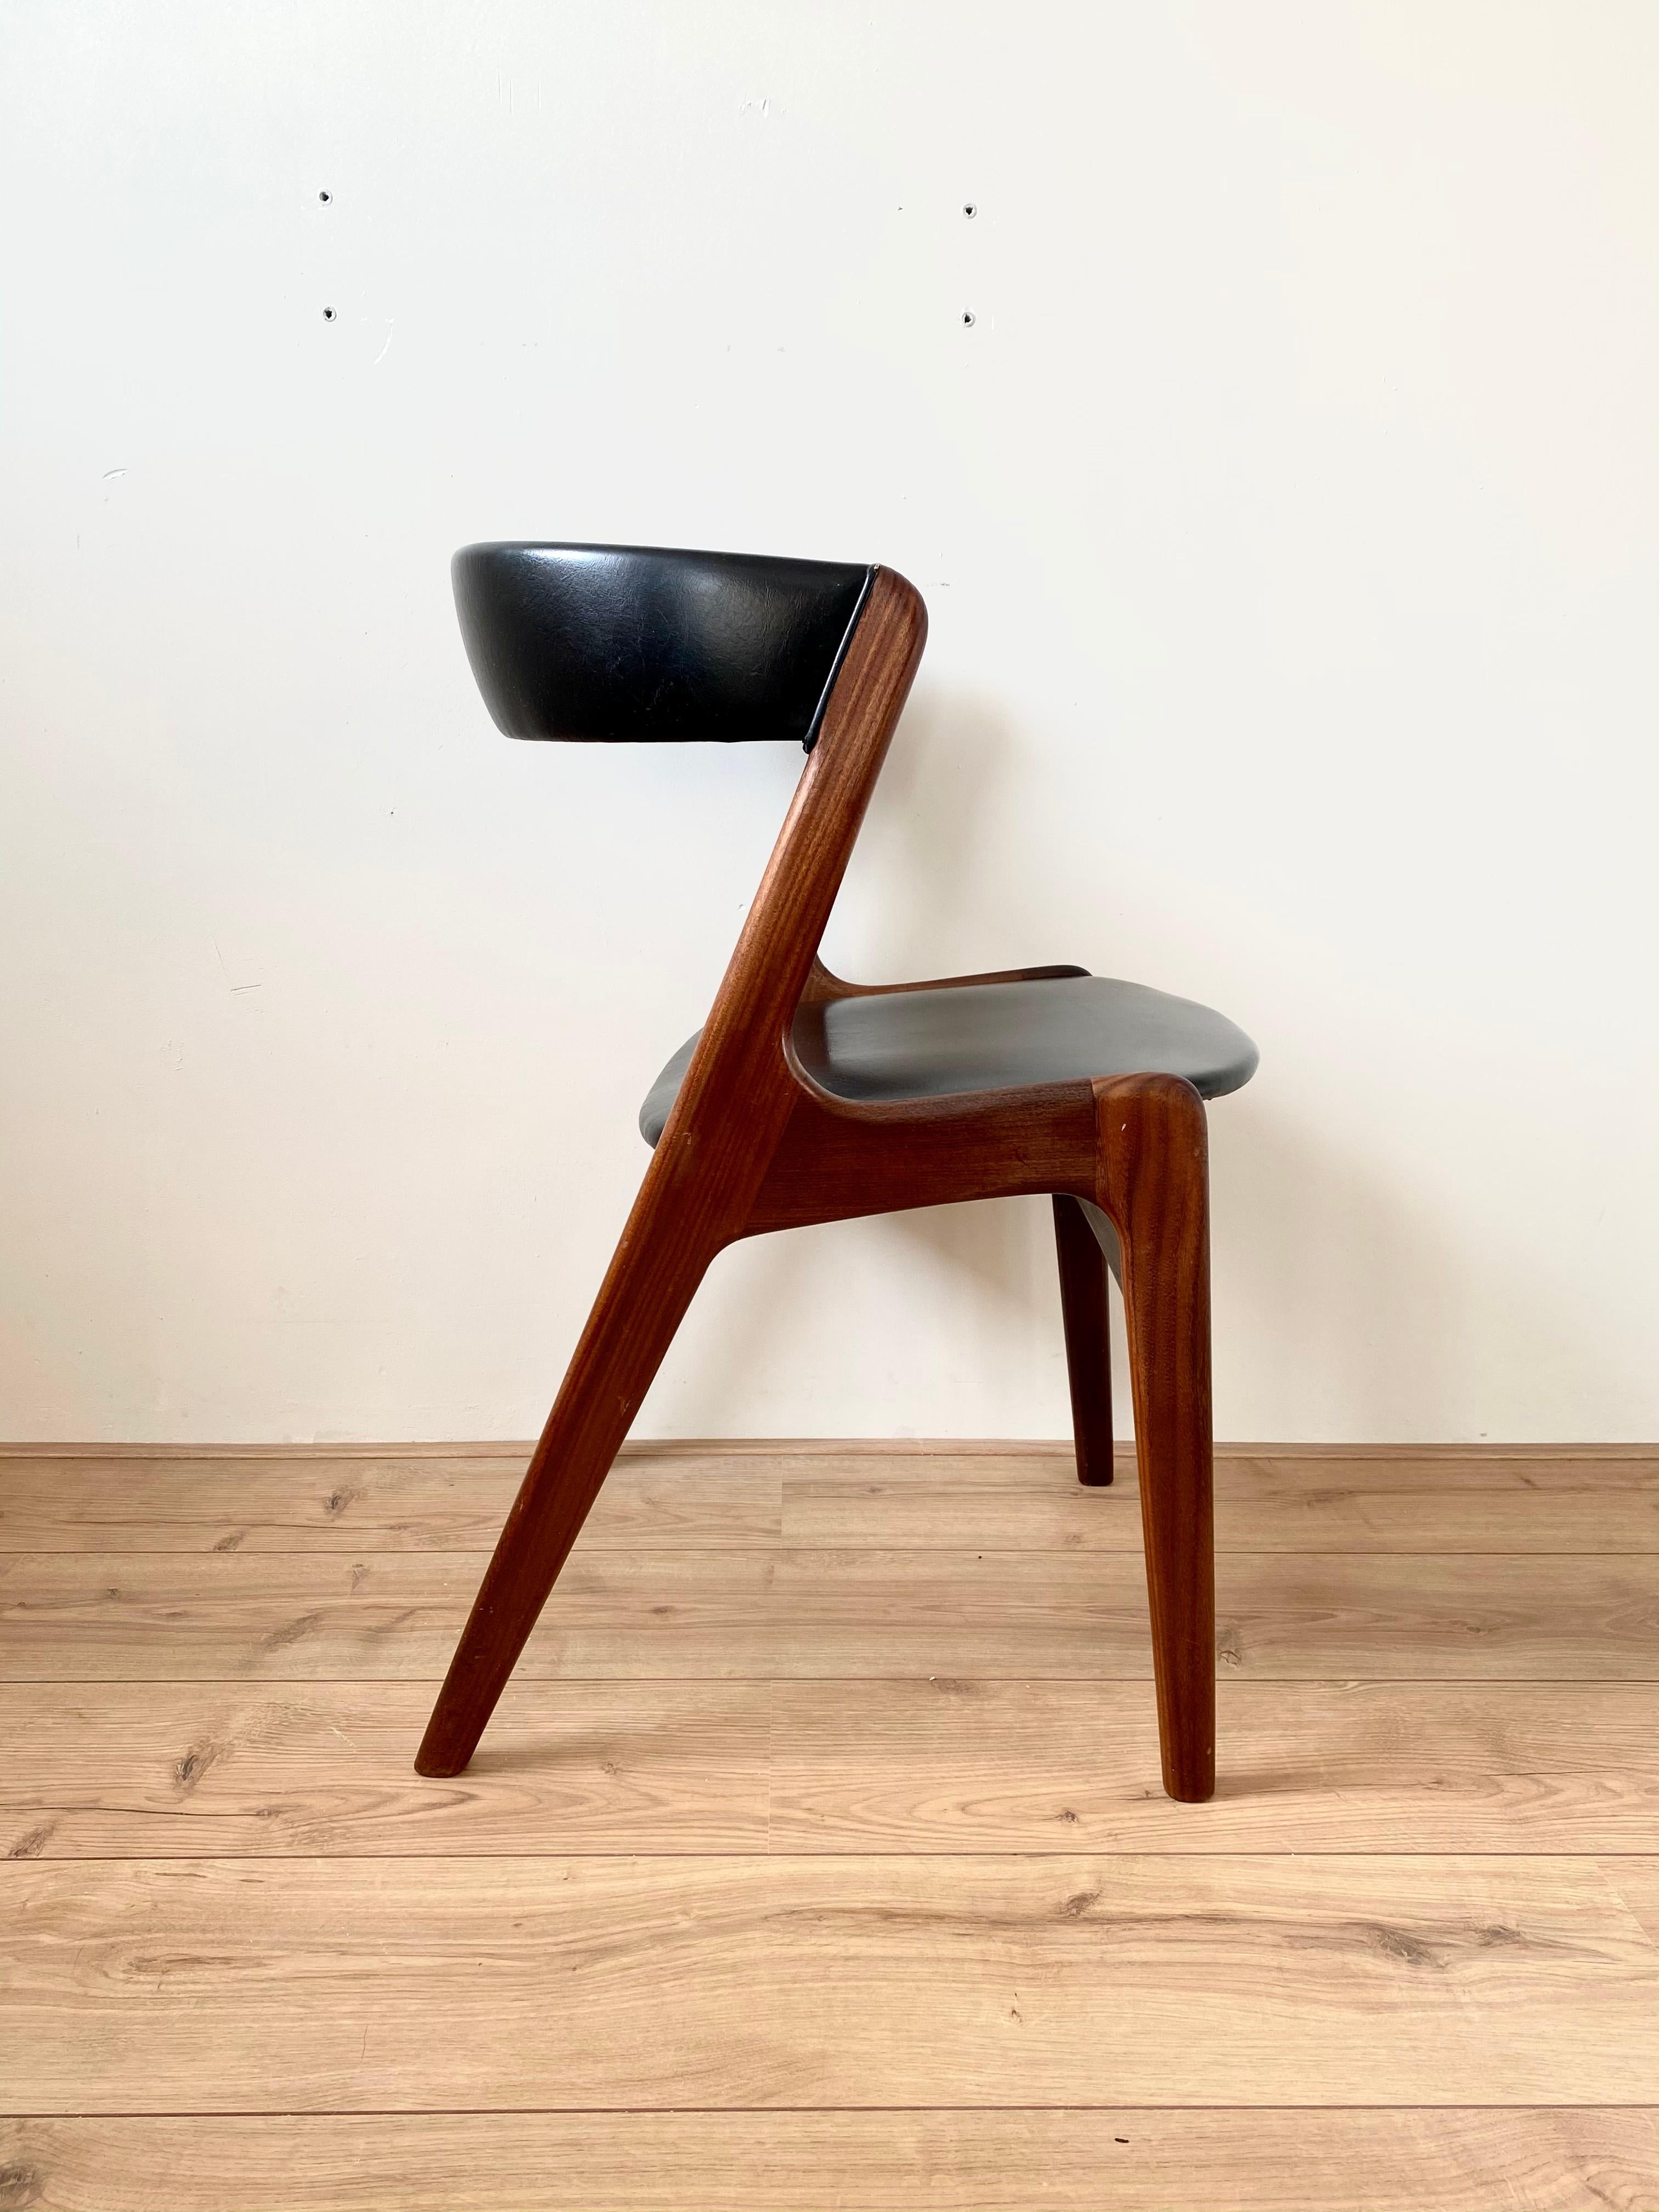 20th Century Midcentury Danish Design Dining Chairs By T.H. Harlev for Farstrup Mobler. For Sale